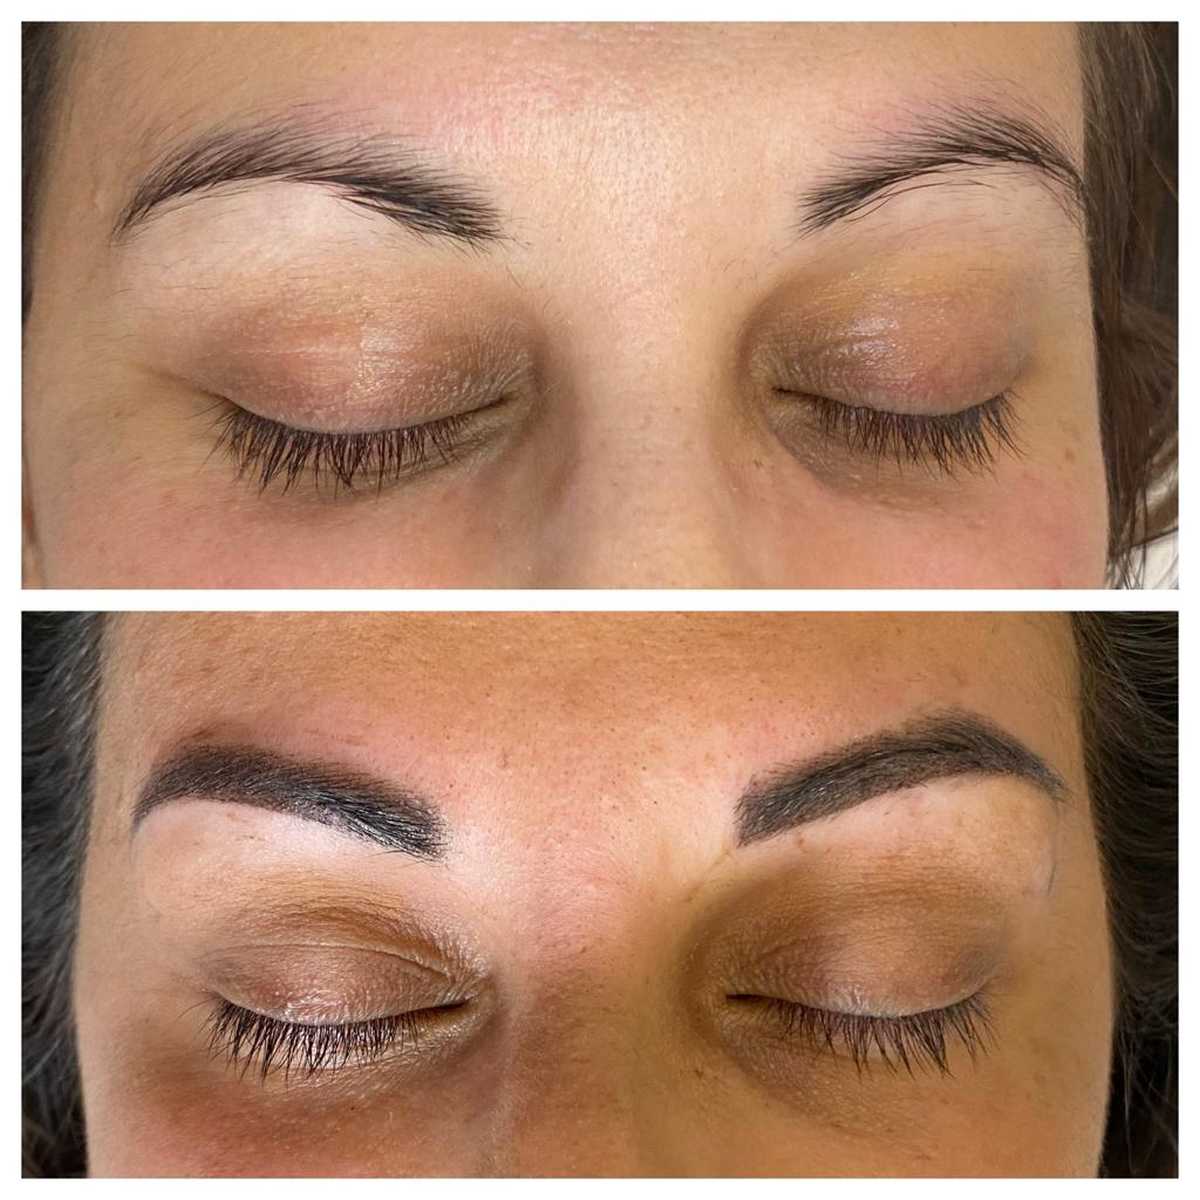 Image of Before and After Eyebrow Tattooing